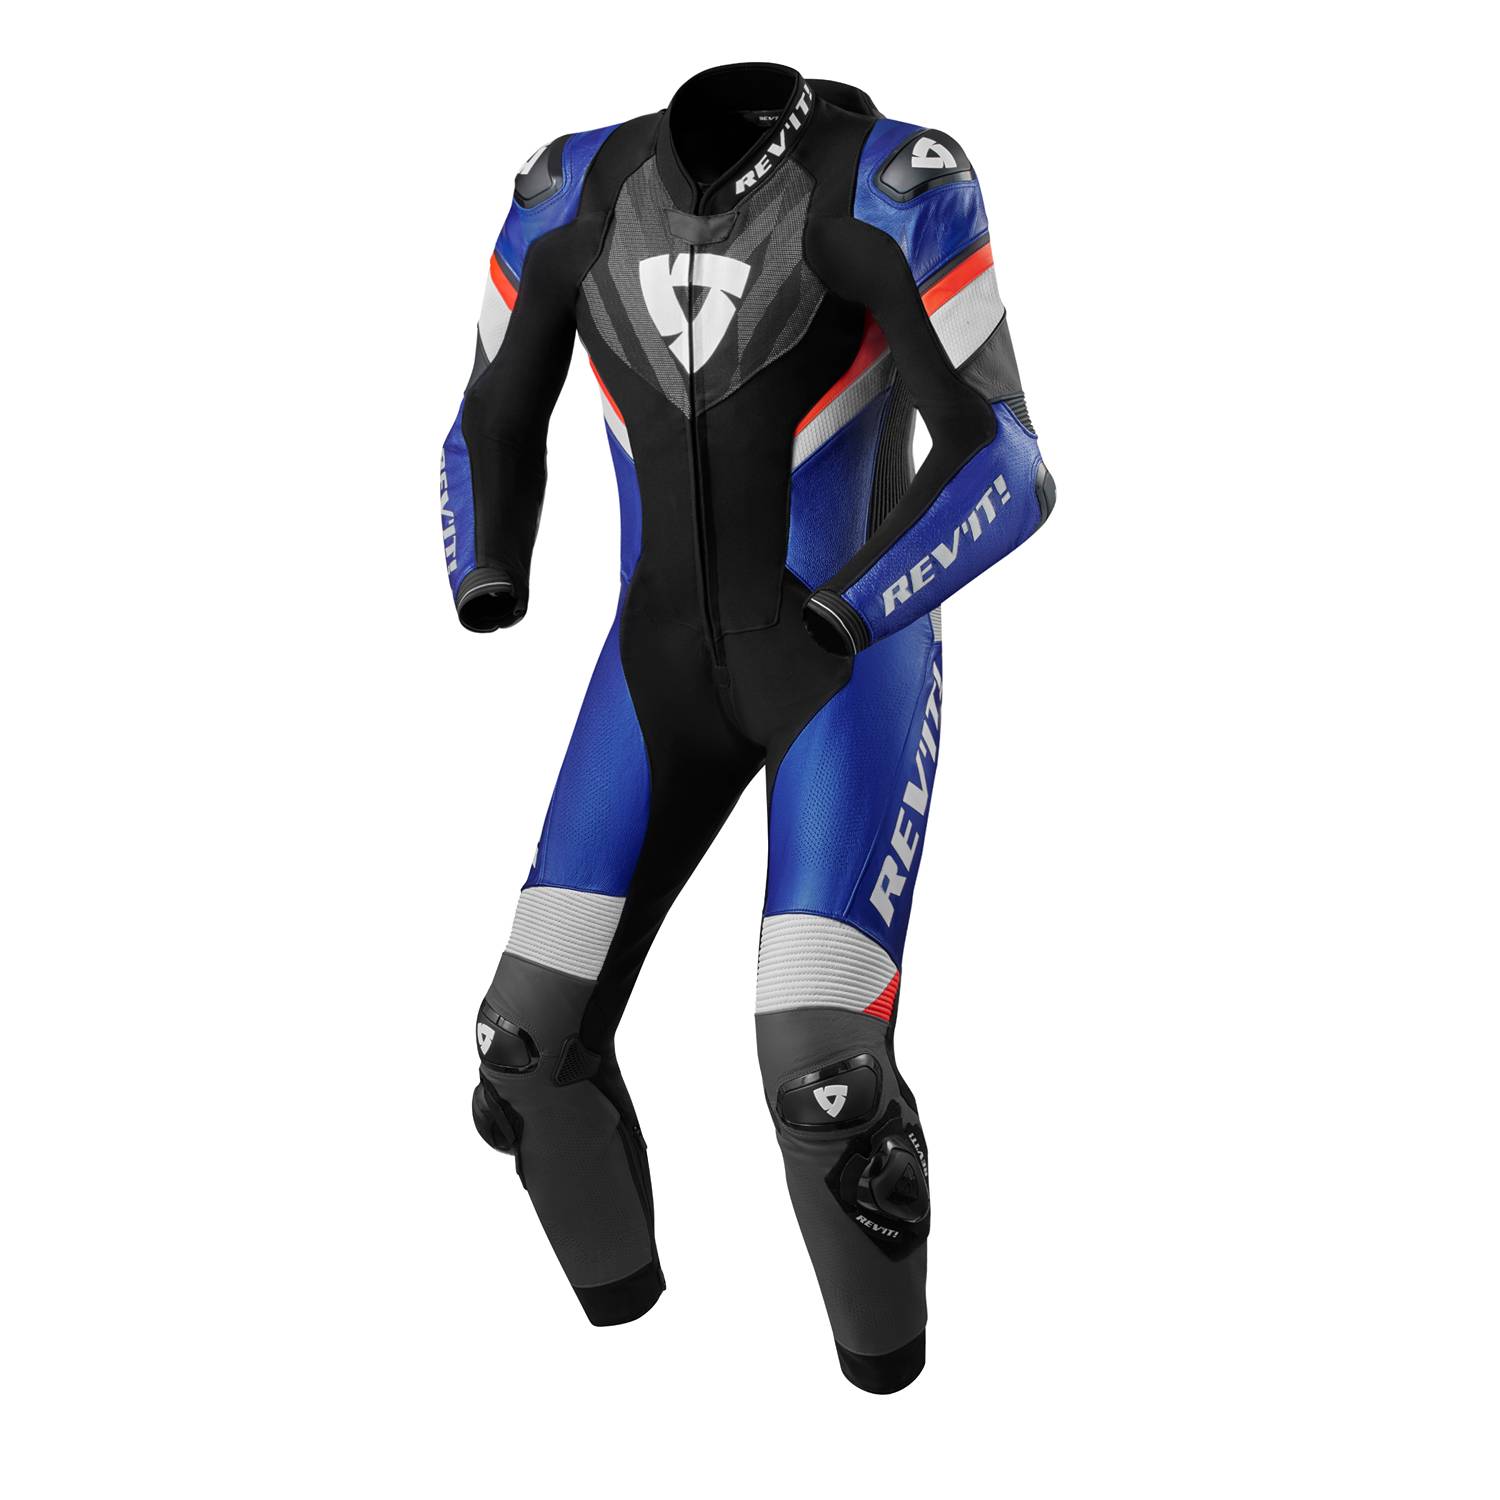 Image of REV'IT! Hyperspeed 2 One Piece Suit Black Blue Size 50 ID 8700001359733